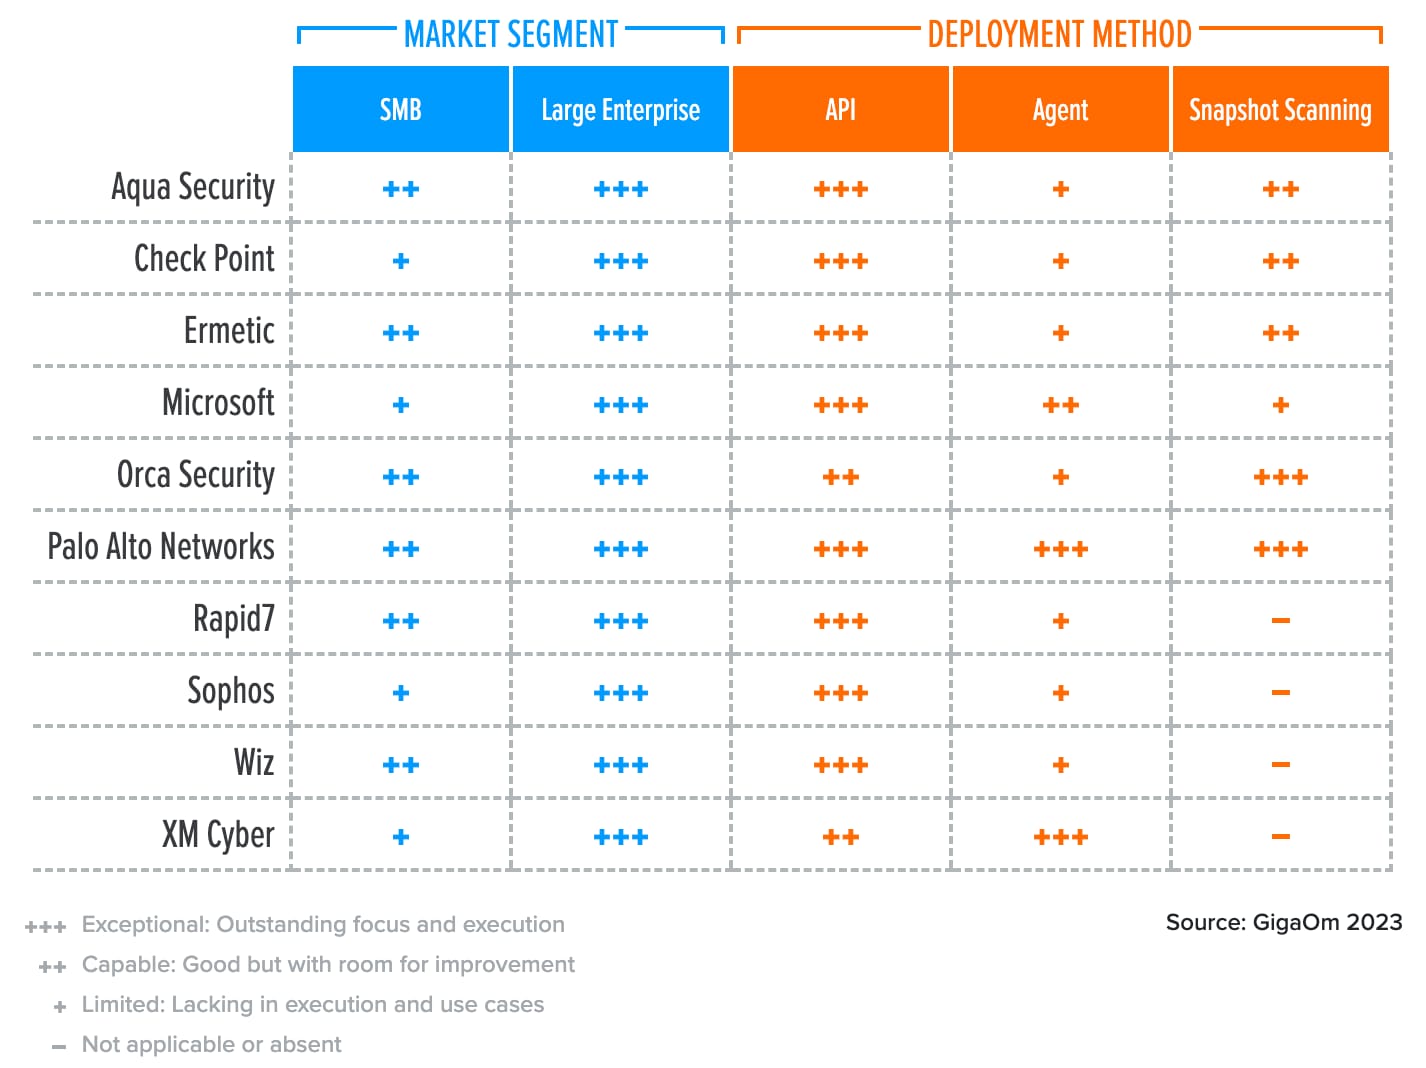 GigaOm’s market segment and deployment model criteria shows Palo Alto Networks as the only vendor with exceptional scores across all deployment methods. 